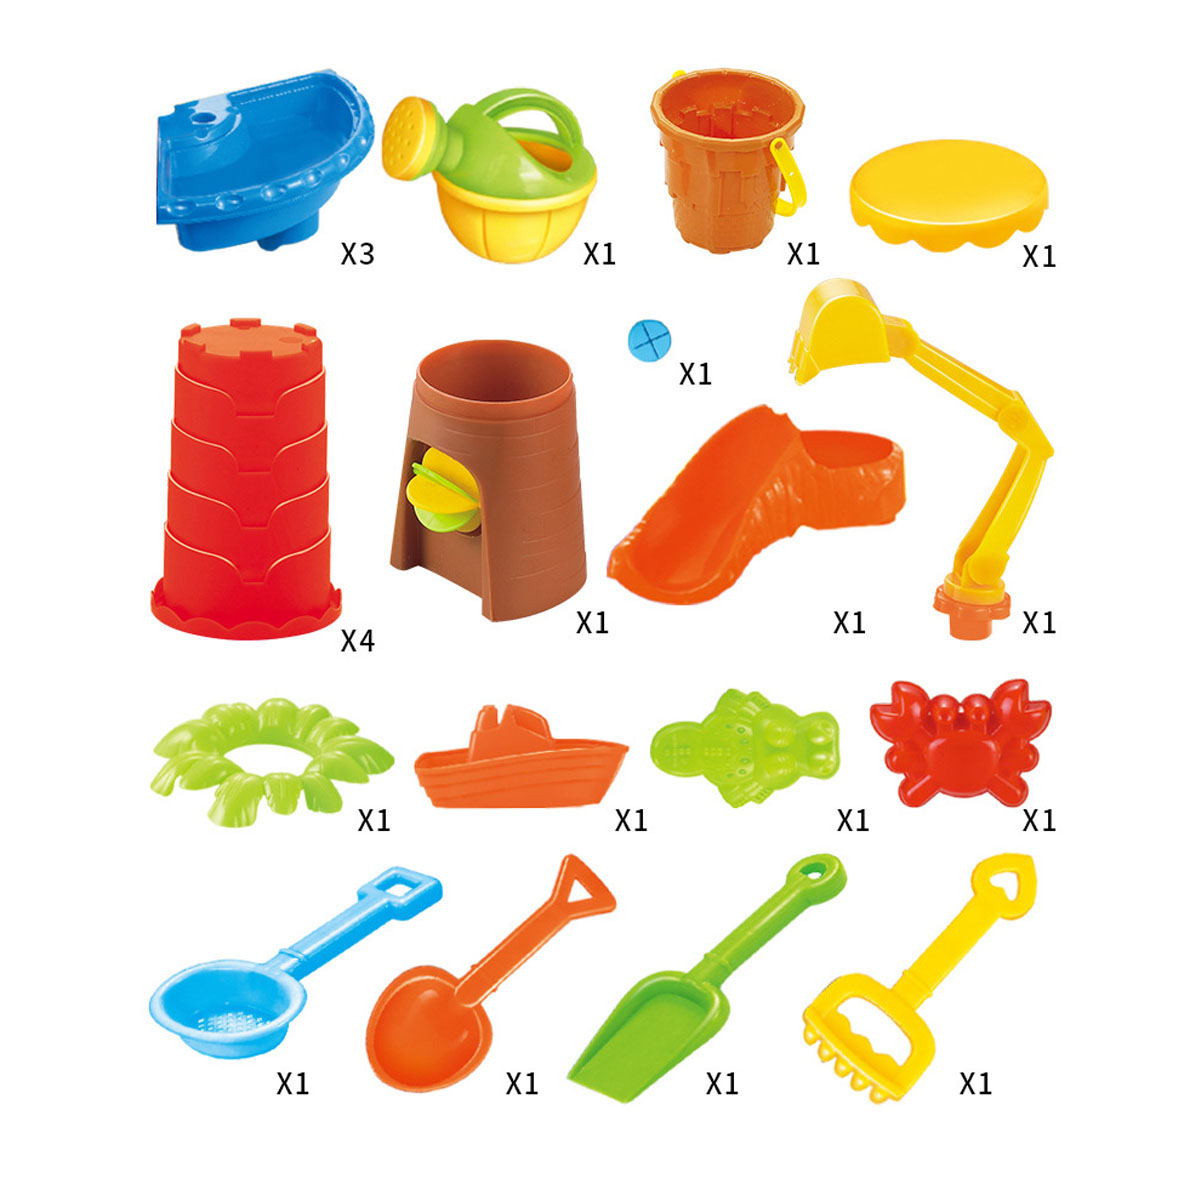 2-IN-1-Multi-style-Summer-Beach-Sand-Kids-Play-Water-Digging-Sandglass-Play-Sand-Tool-Set-Toys-for-K-1699507-5